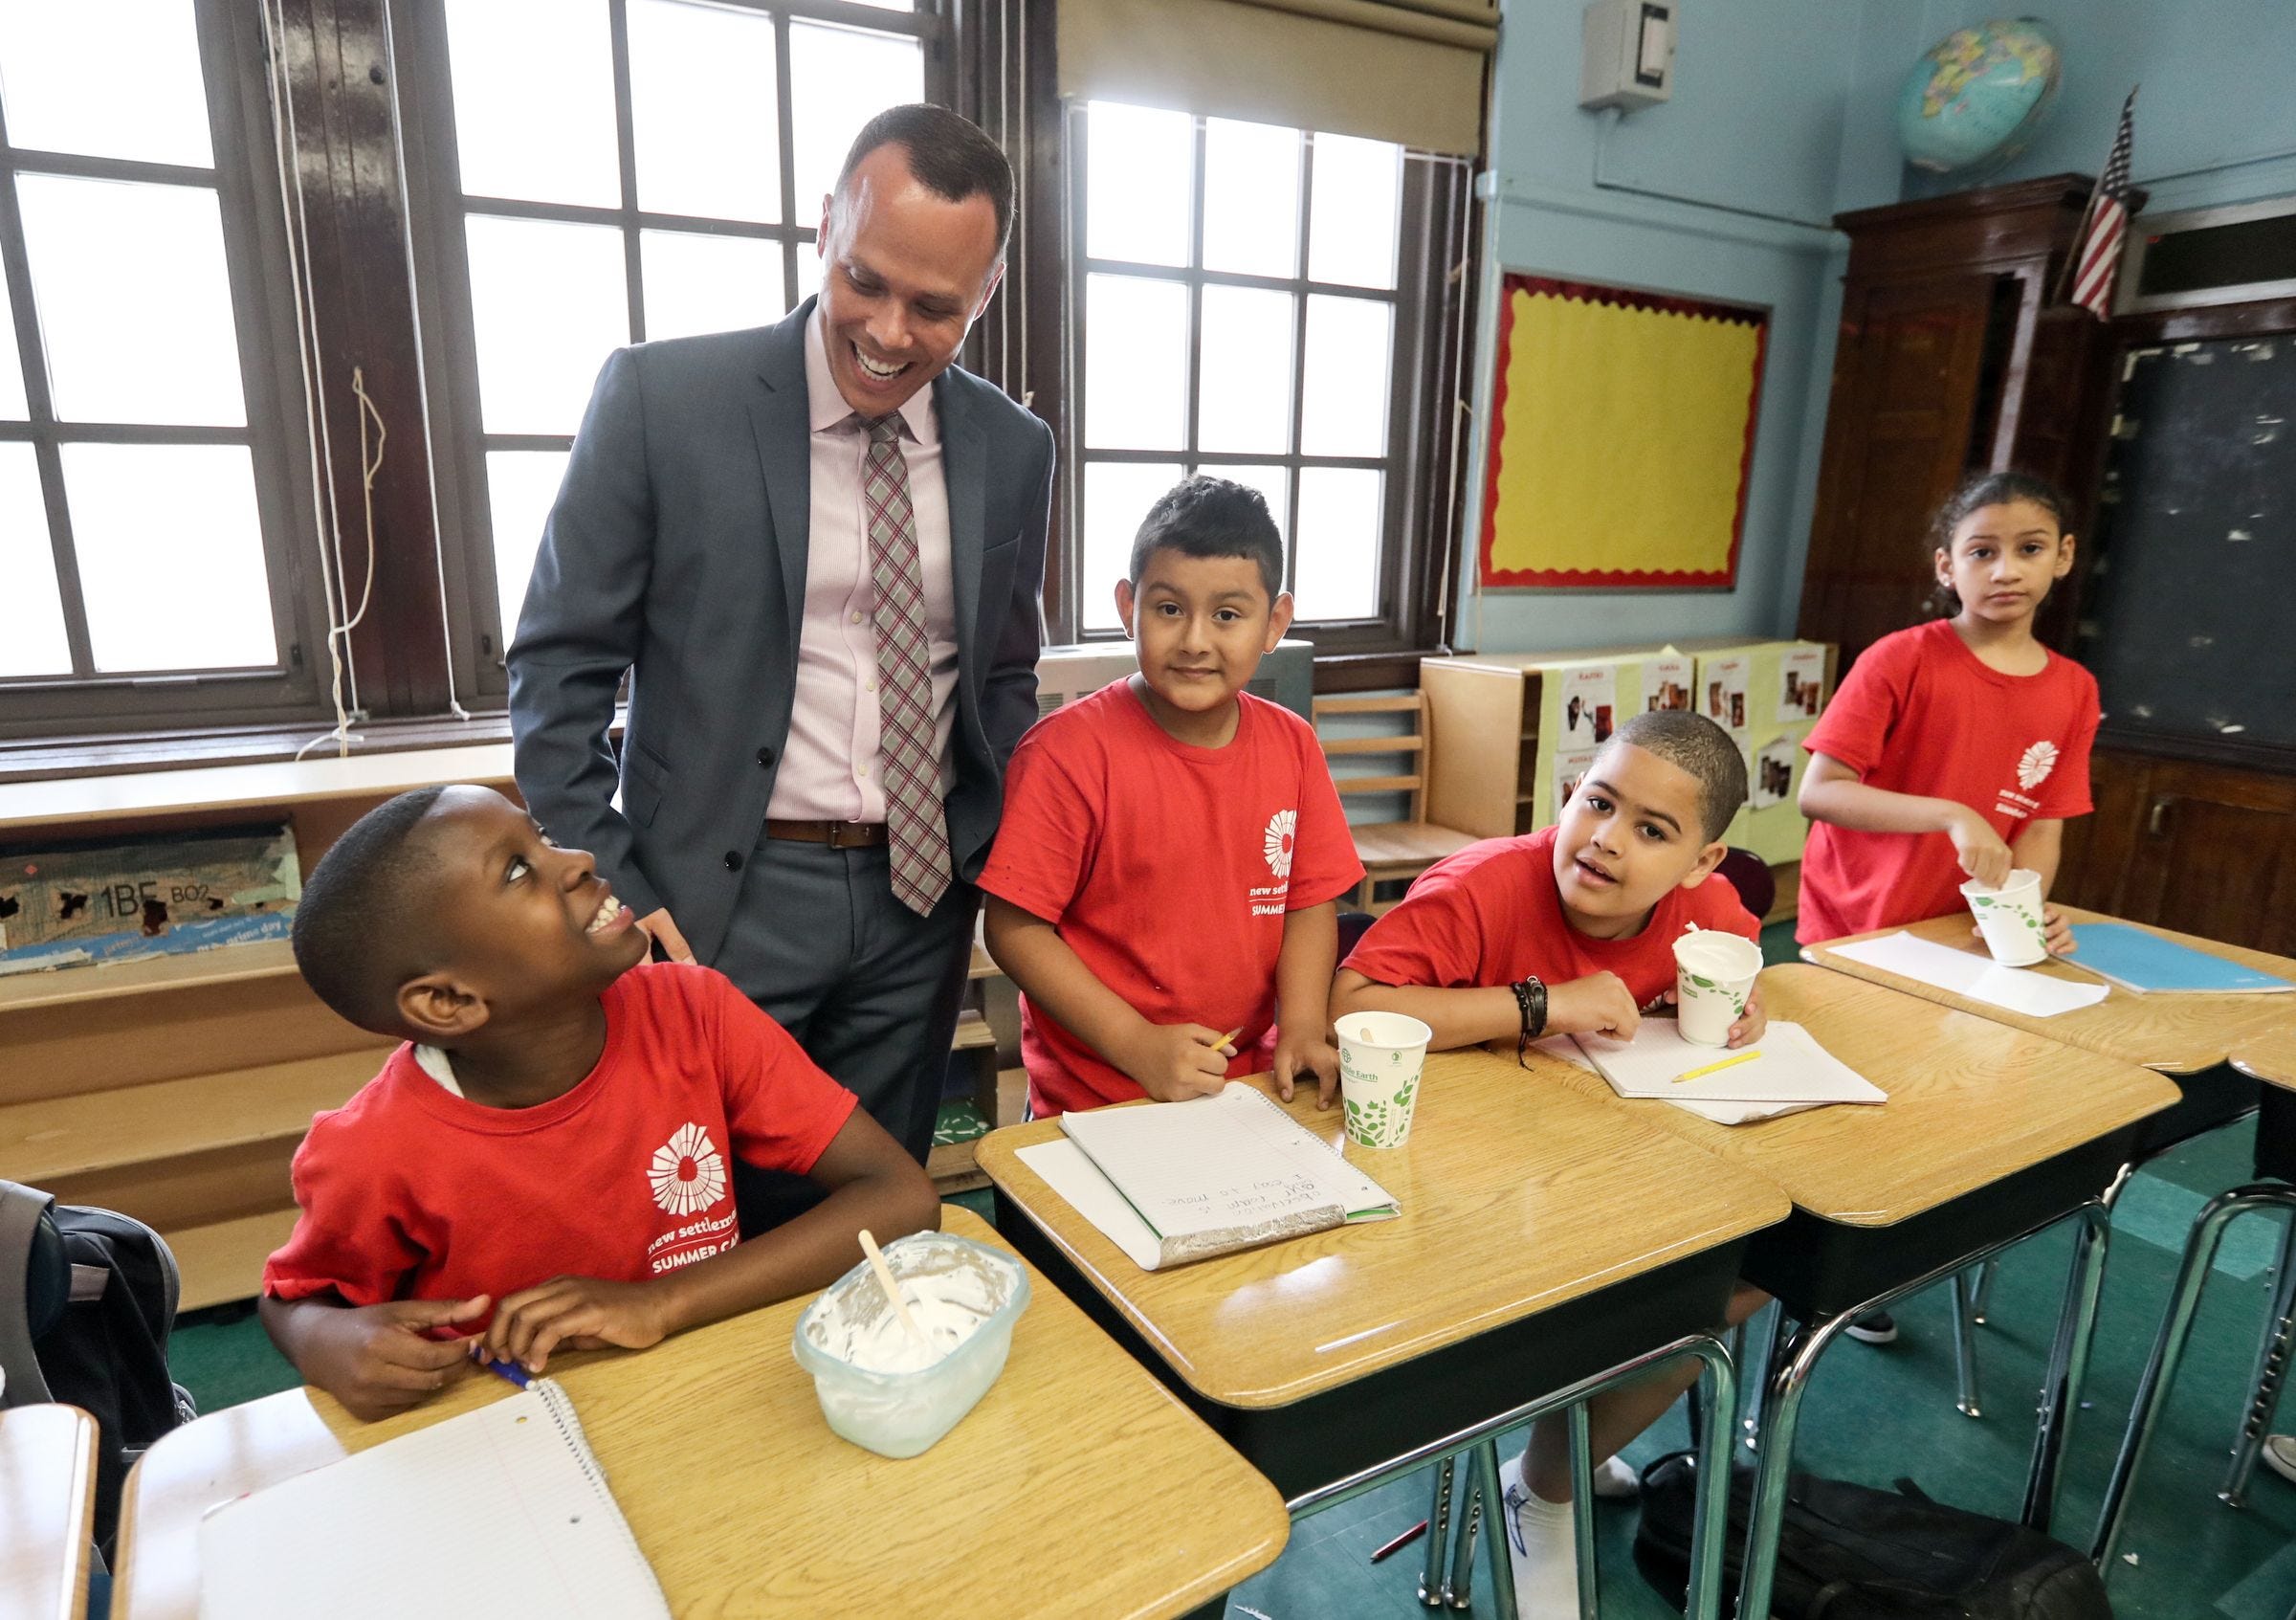 Lessons for Rochester: Failed Bronx school becomes coolest place in town